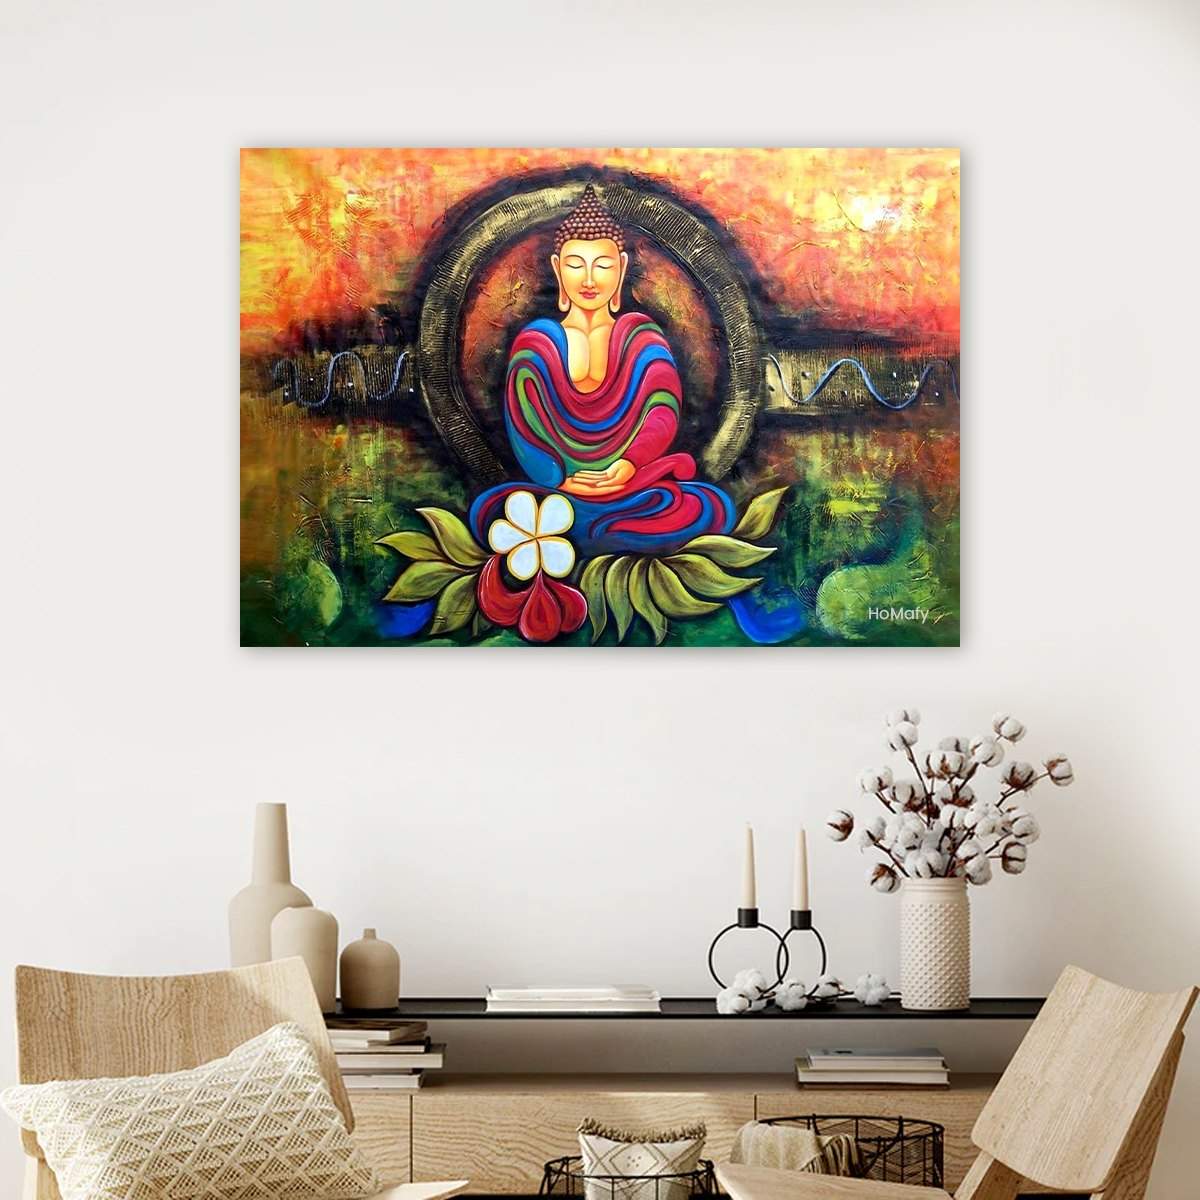 Colorful 3D Lord Buddha Canvas Painting | Buddha Painting - HoMafy